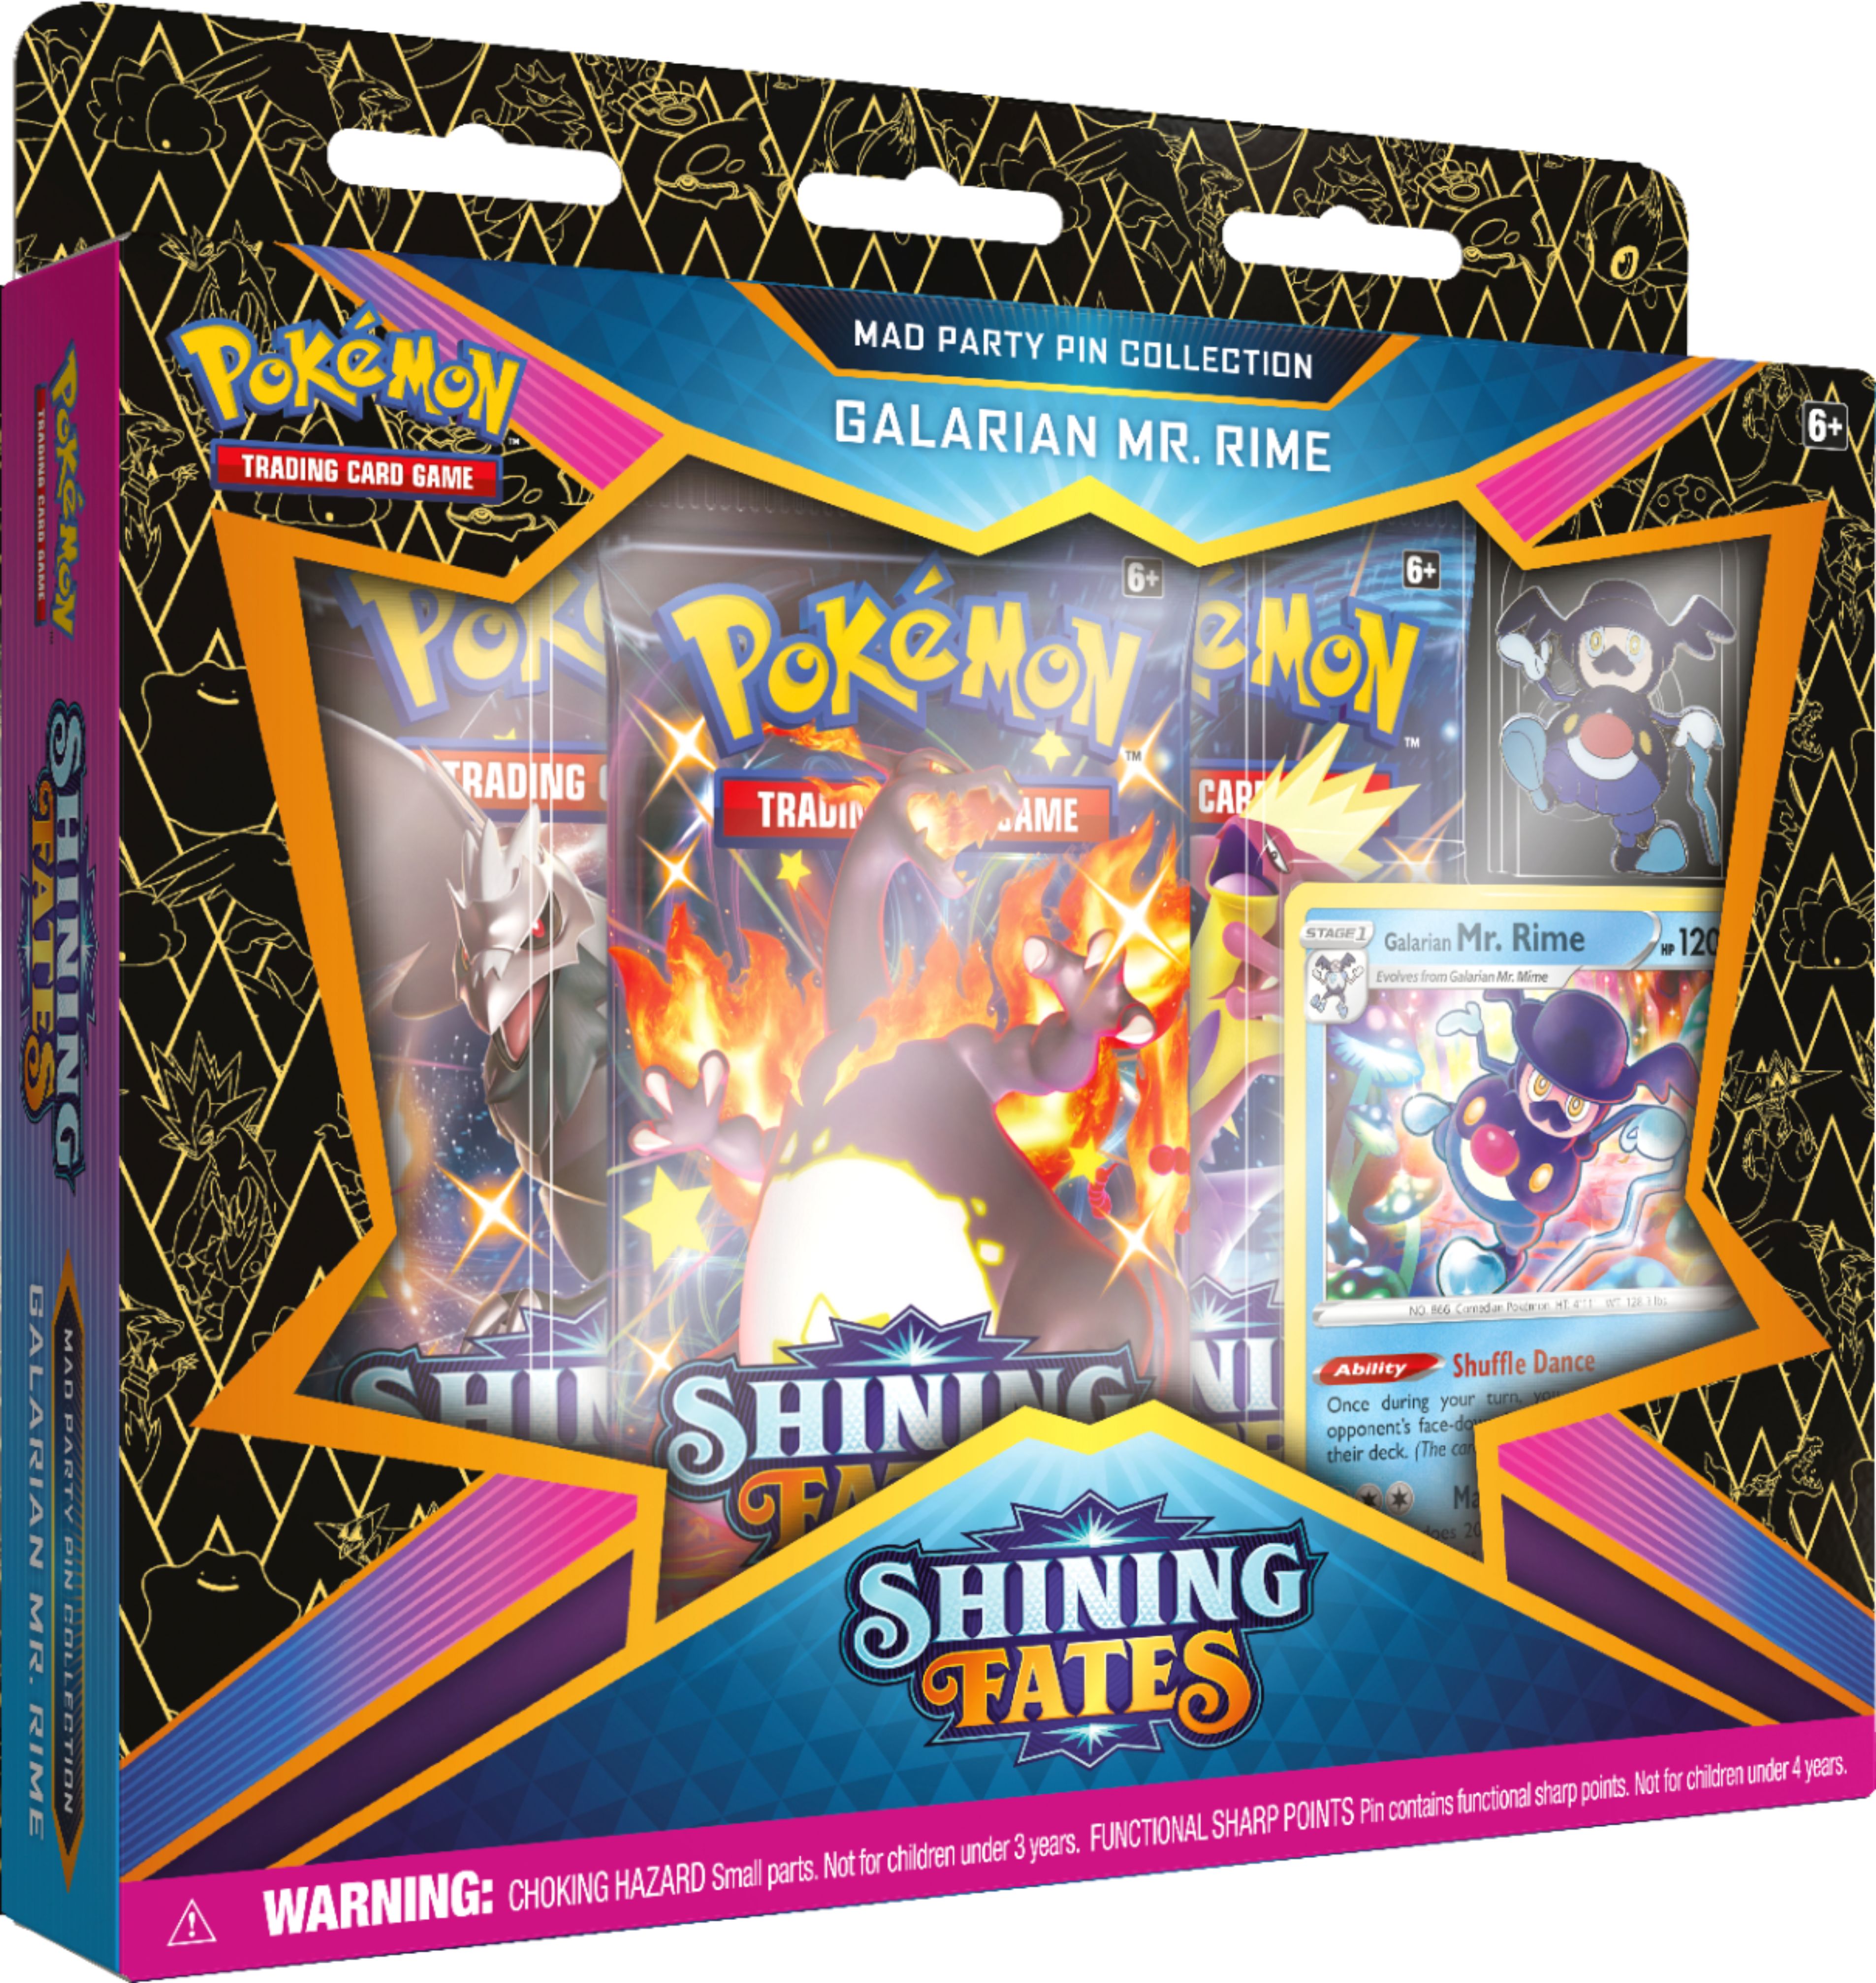 12 Packs POKEMON SHINING FATES x4 MAD PARTY PIN COLLCTION